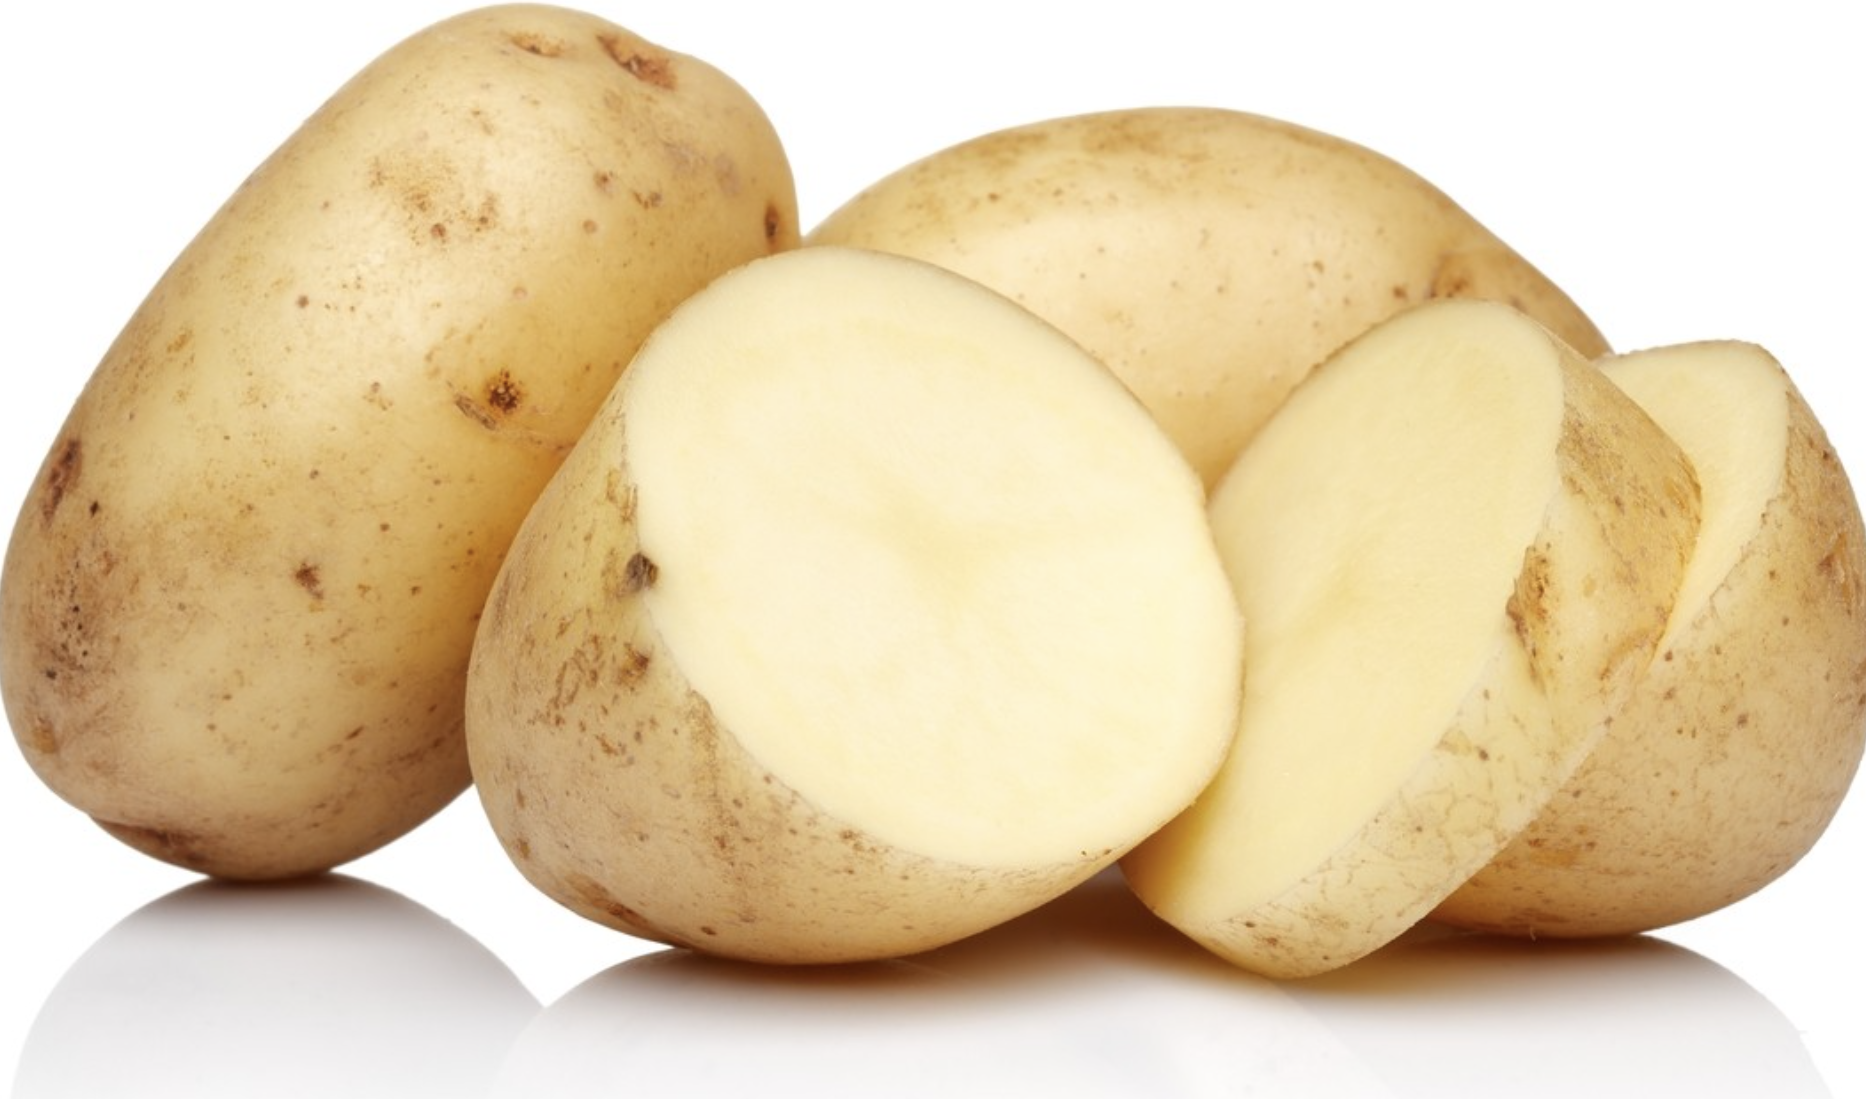 “Potatoes. Even normal stores have 10lbs for $5, and you can easily get 50lbs for $20 at a restaurant supply place.” — Corvus_Antipodum